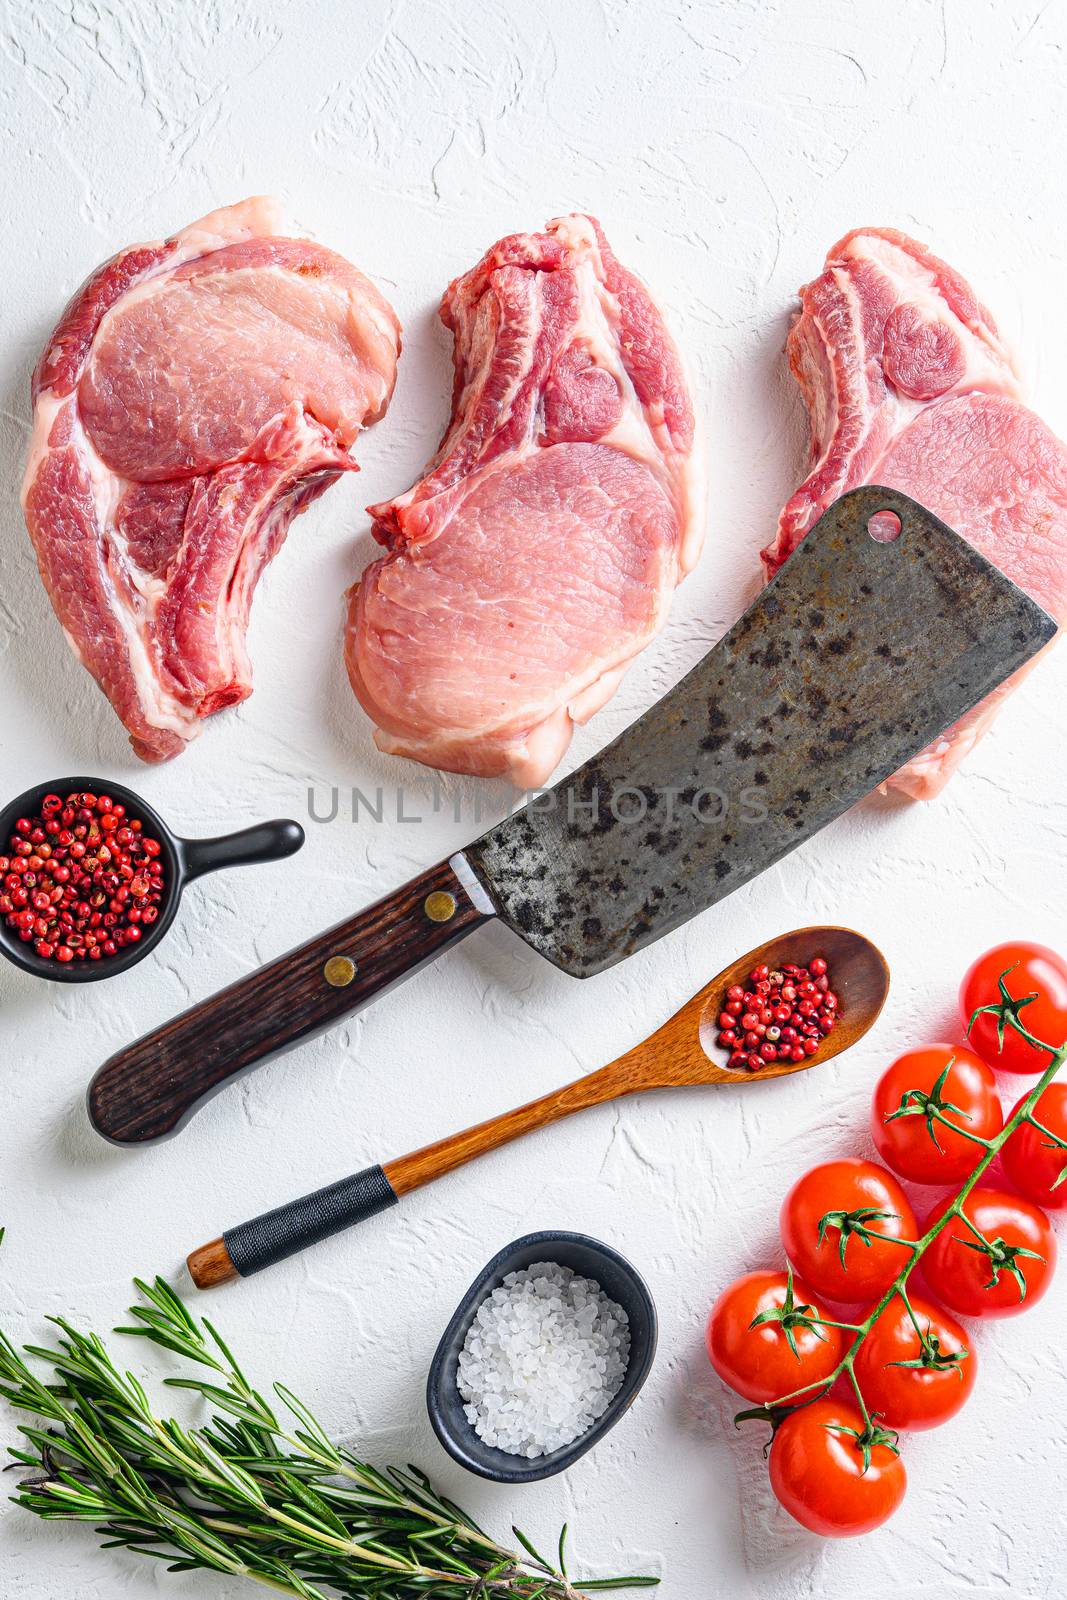 Set for bio grilling butcher cleaver over organic bio Raw pork chops , baking or frying, textured white background. vertical top view layflat by Ilianesolenyi